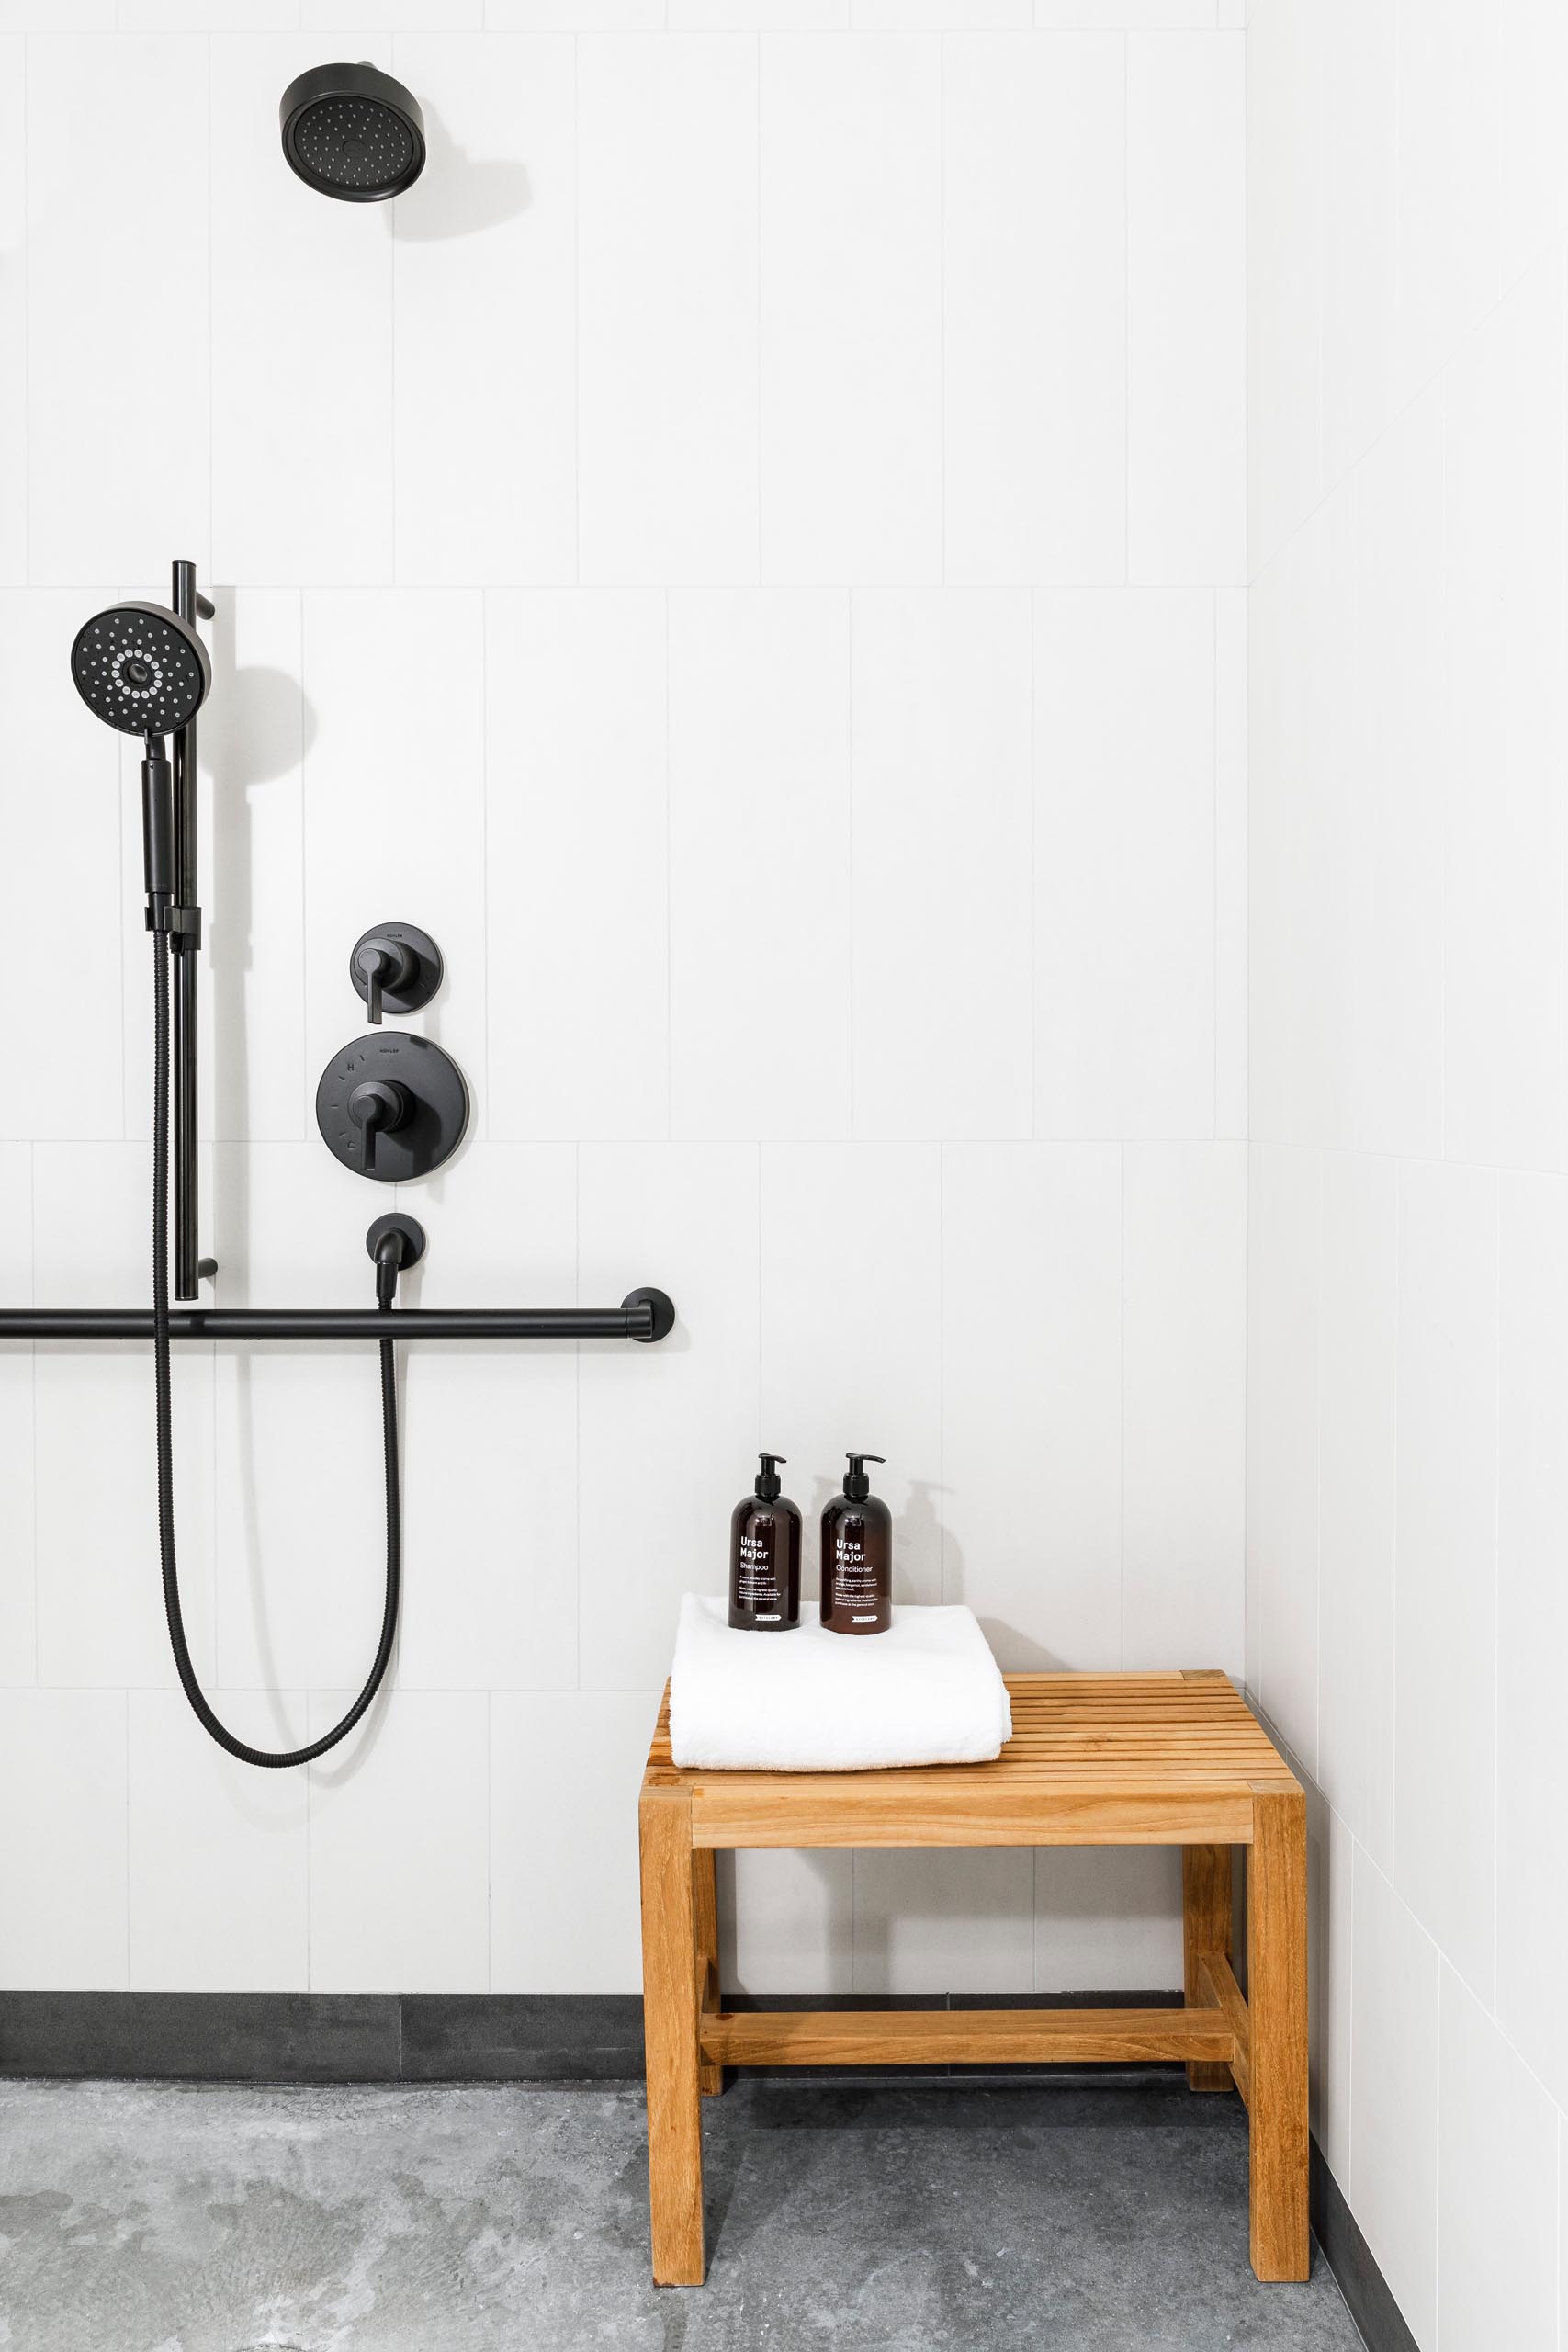 A modern bathroom with bright white tiled walls that contrast the black shower heads and hardware.